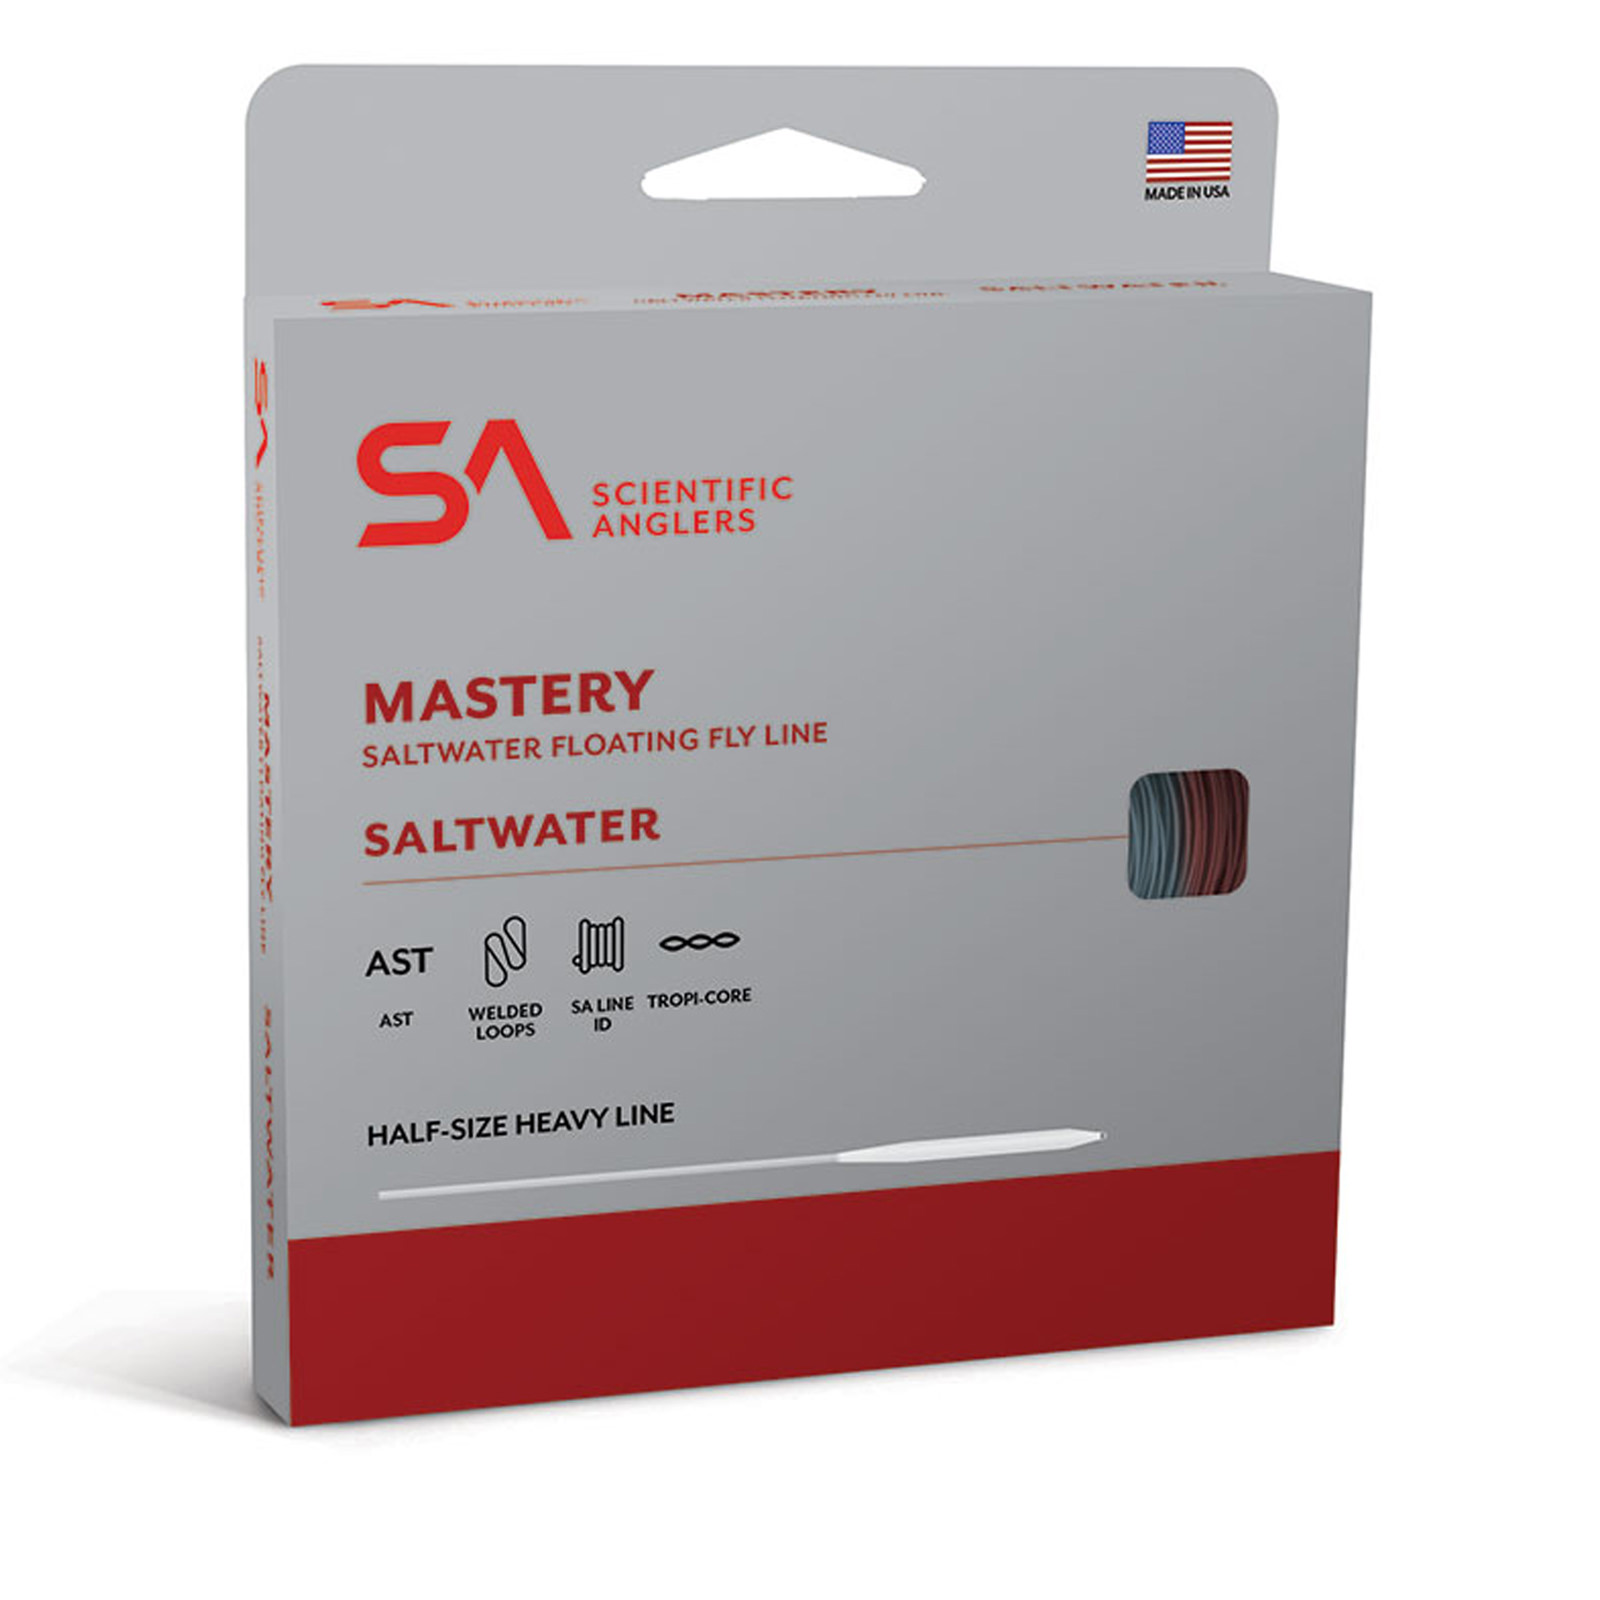 Scientific Anglers Mastery Saltwater Fly Fishing Line - AvidMax